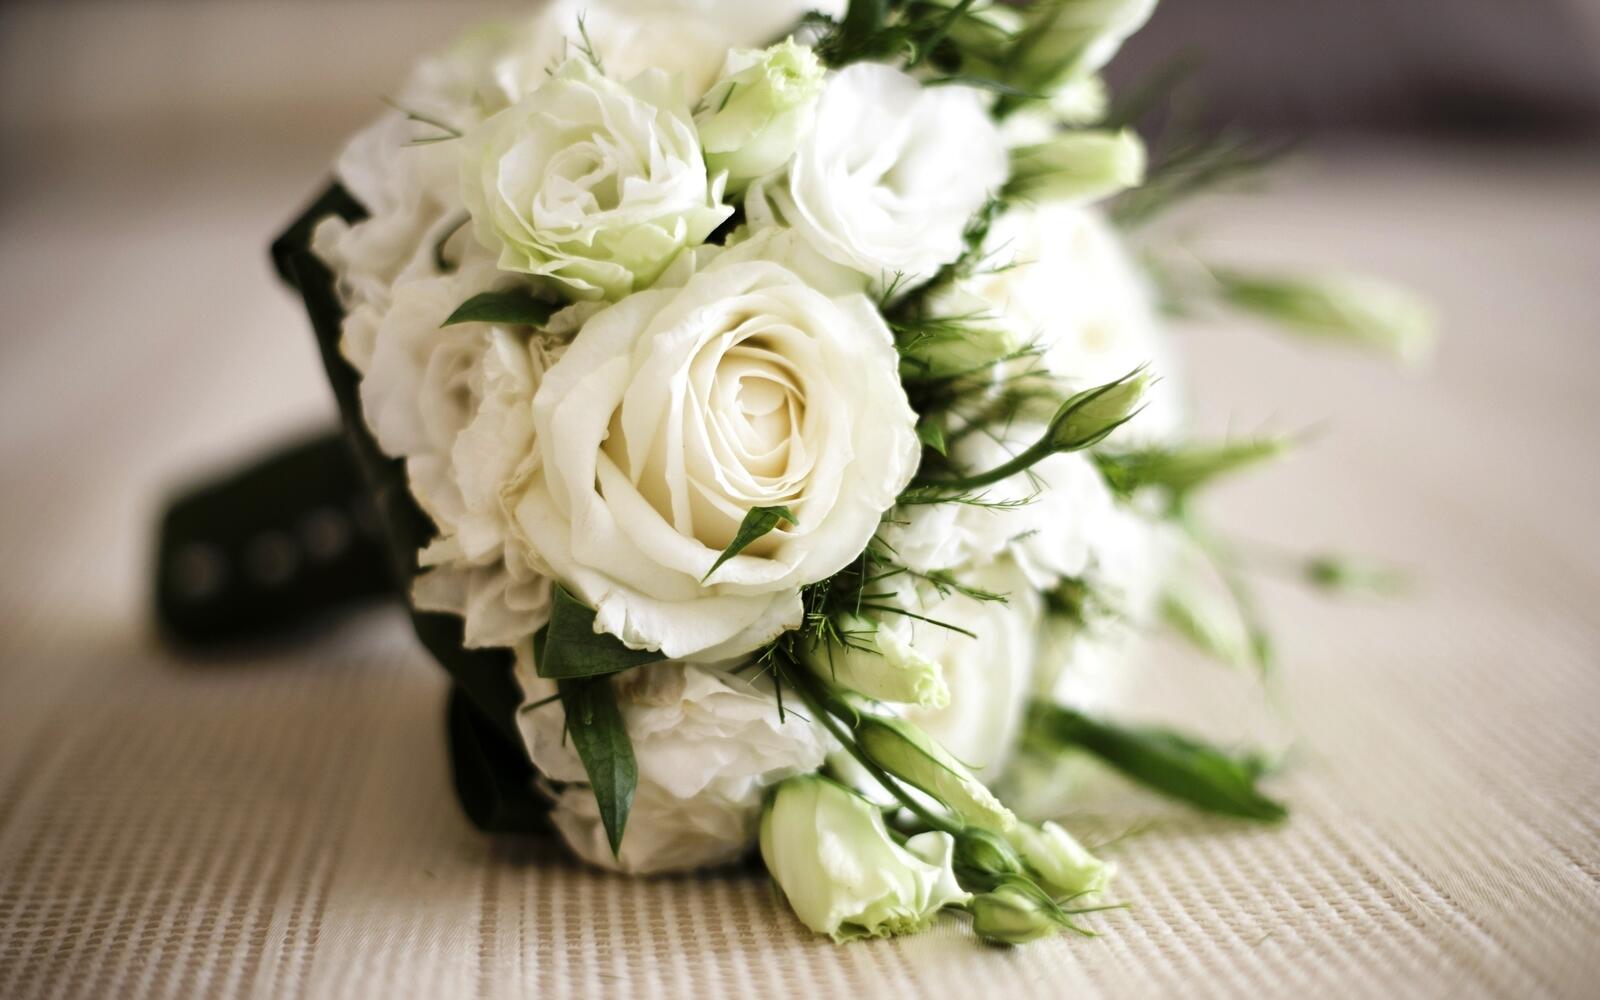 Free photo Picture of a wedding bouquet of white roses